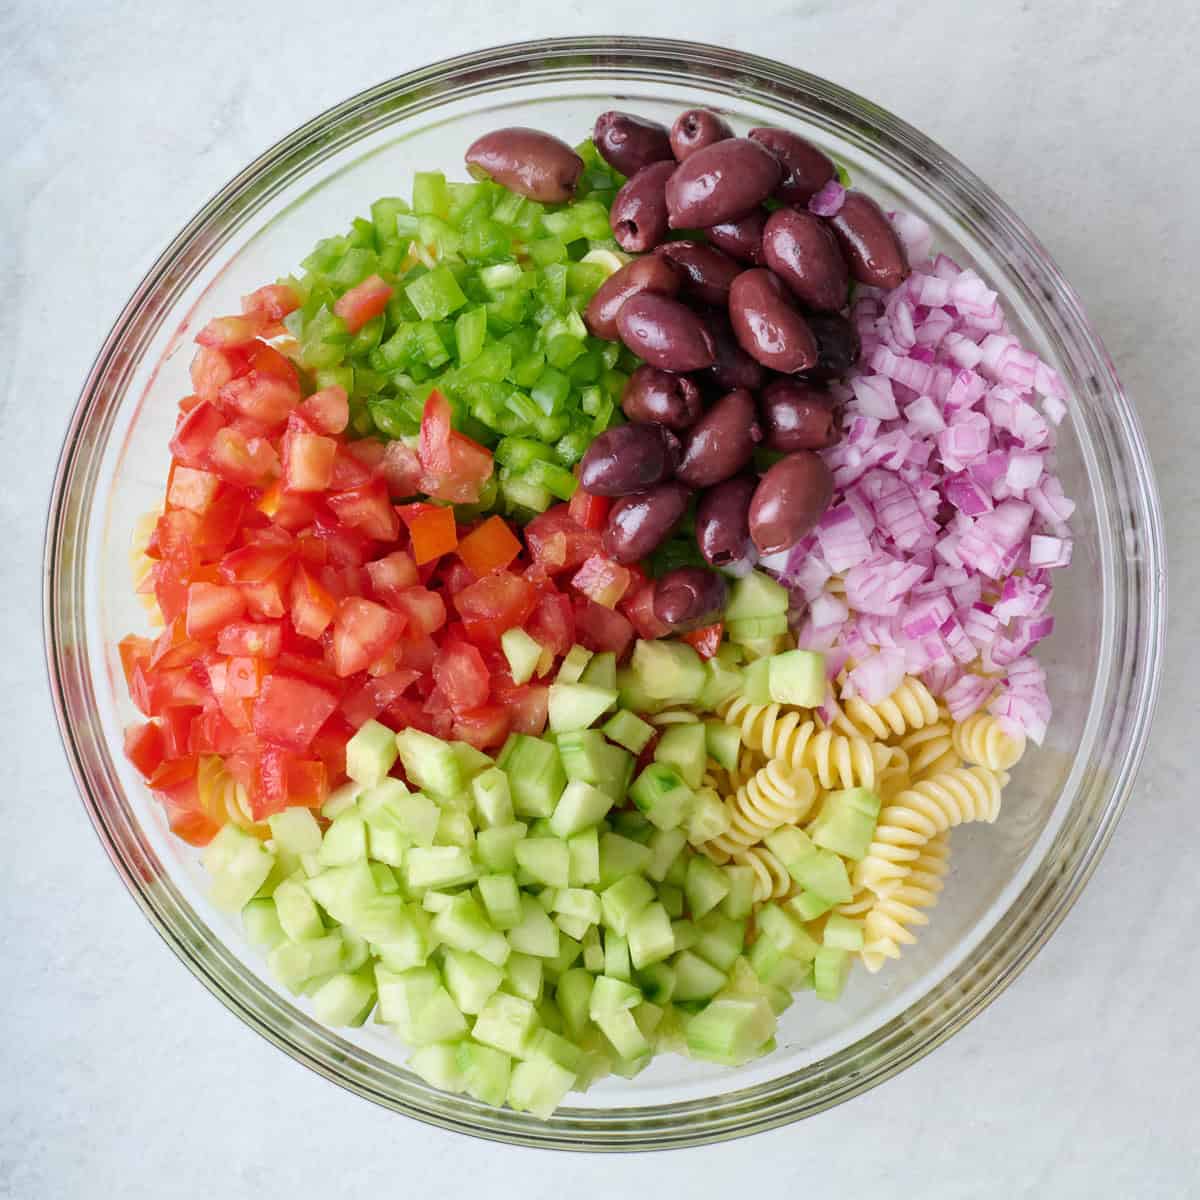 Chopped cucumber, tomatoes, bell pepper and red onion, olives, and cooked pasta in a large glass mixing bowl.